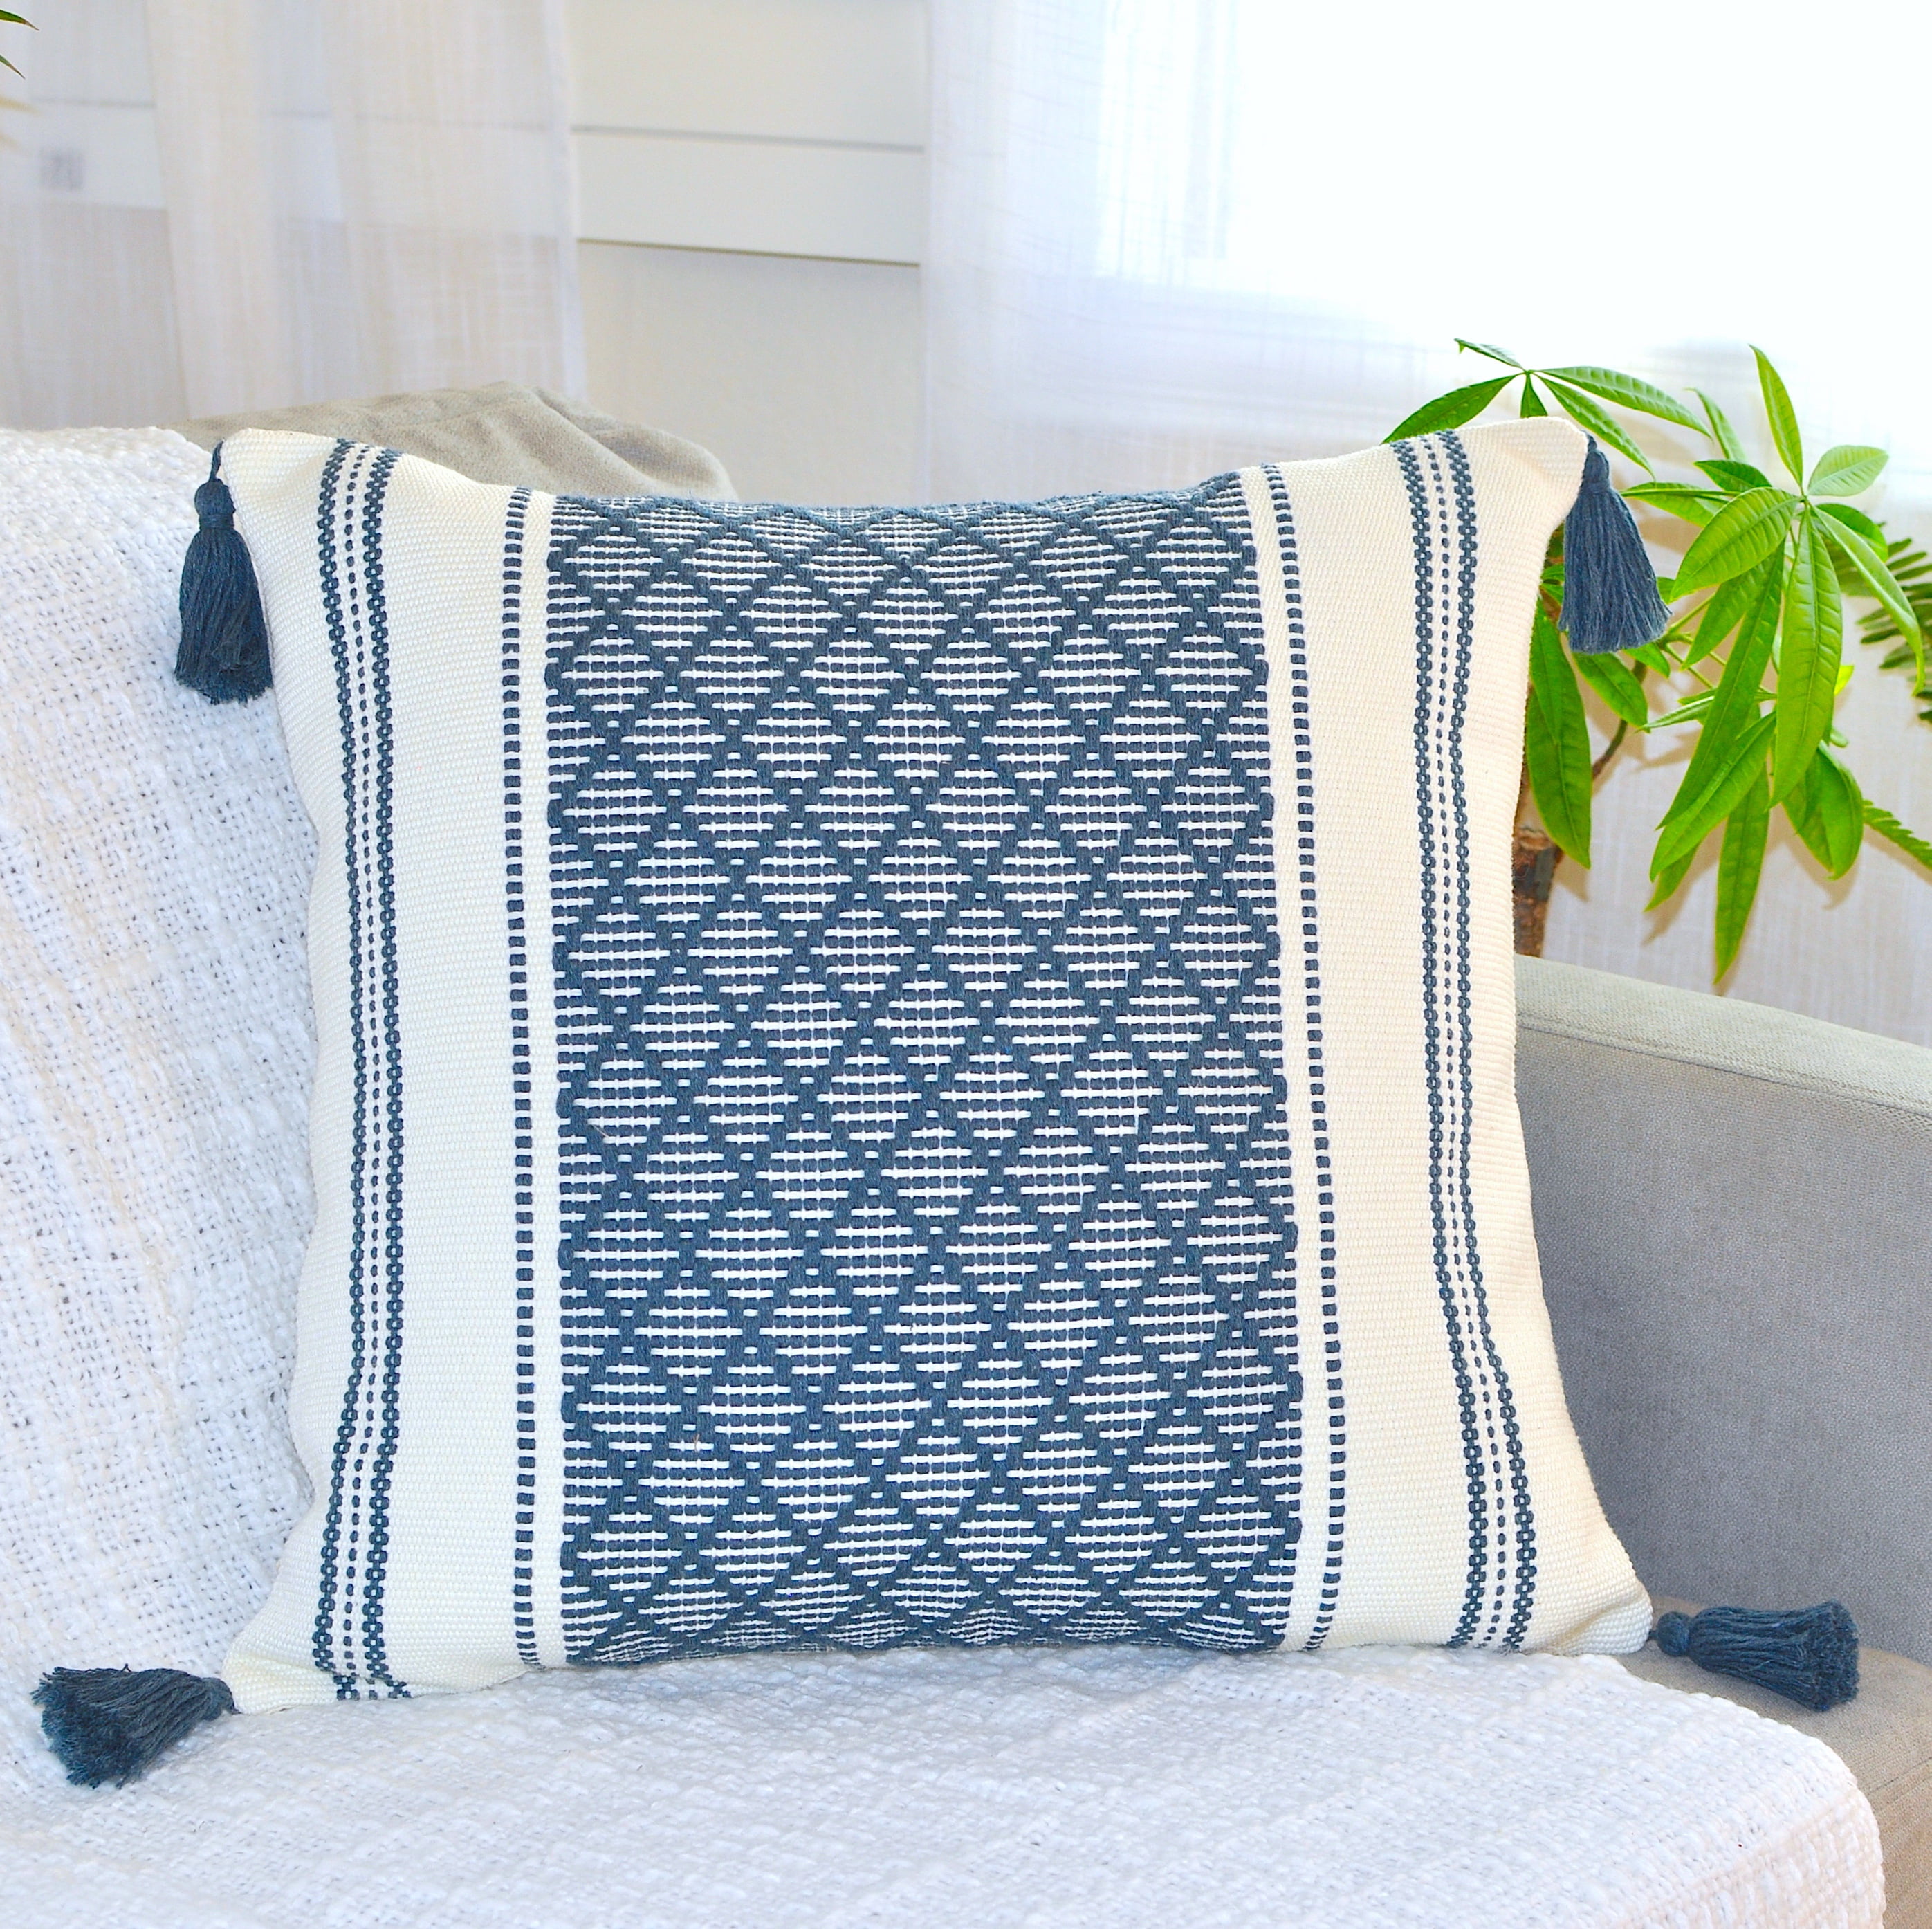 Boho Pillow Cover With Tassels, Navy Blue & White 16x16 inch - Single ...